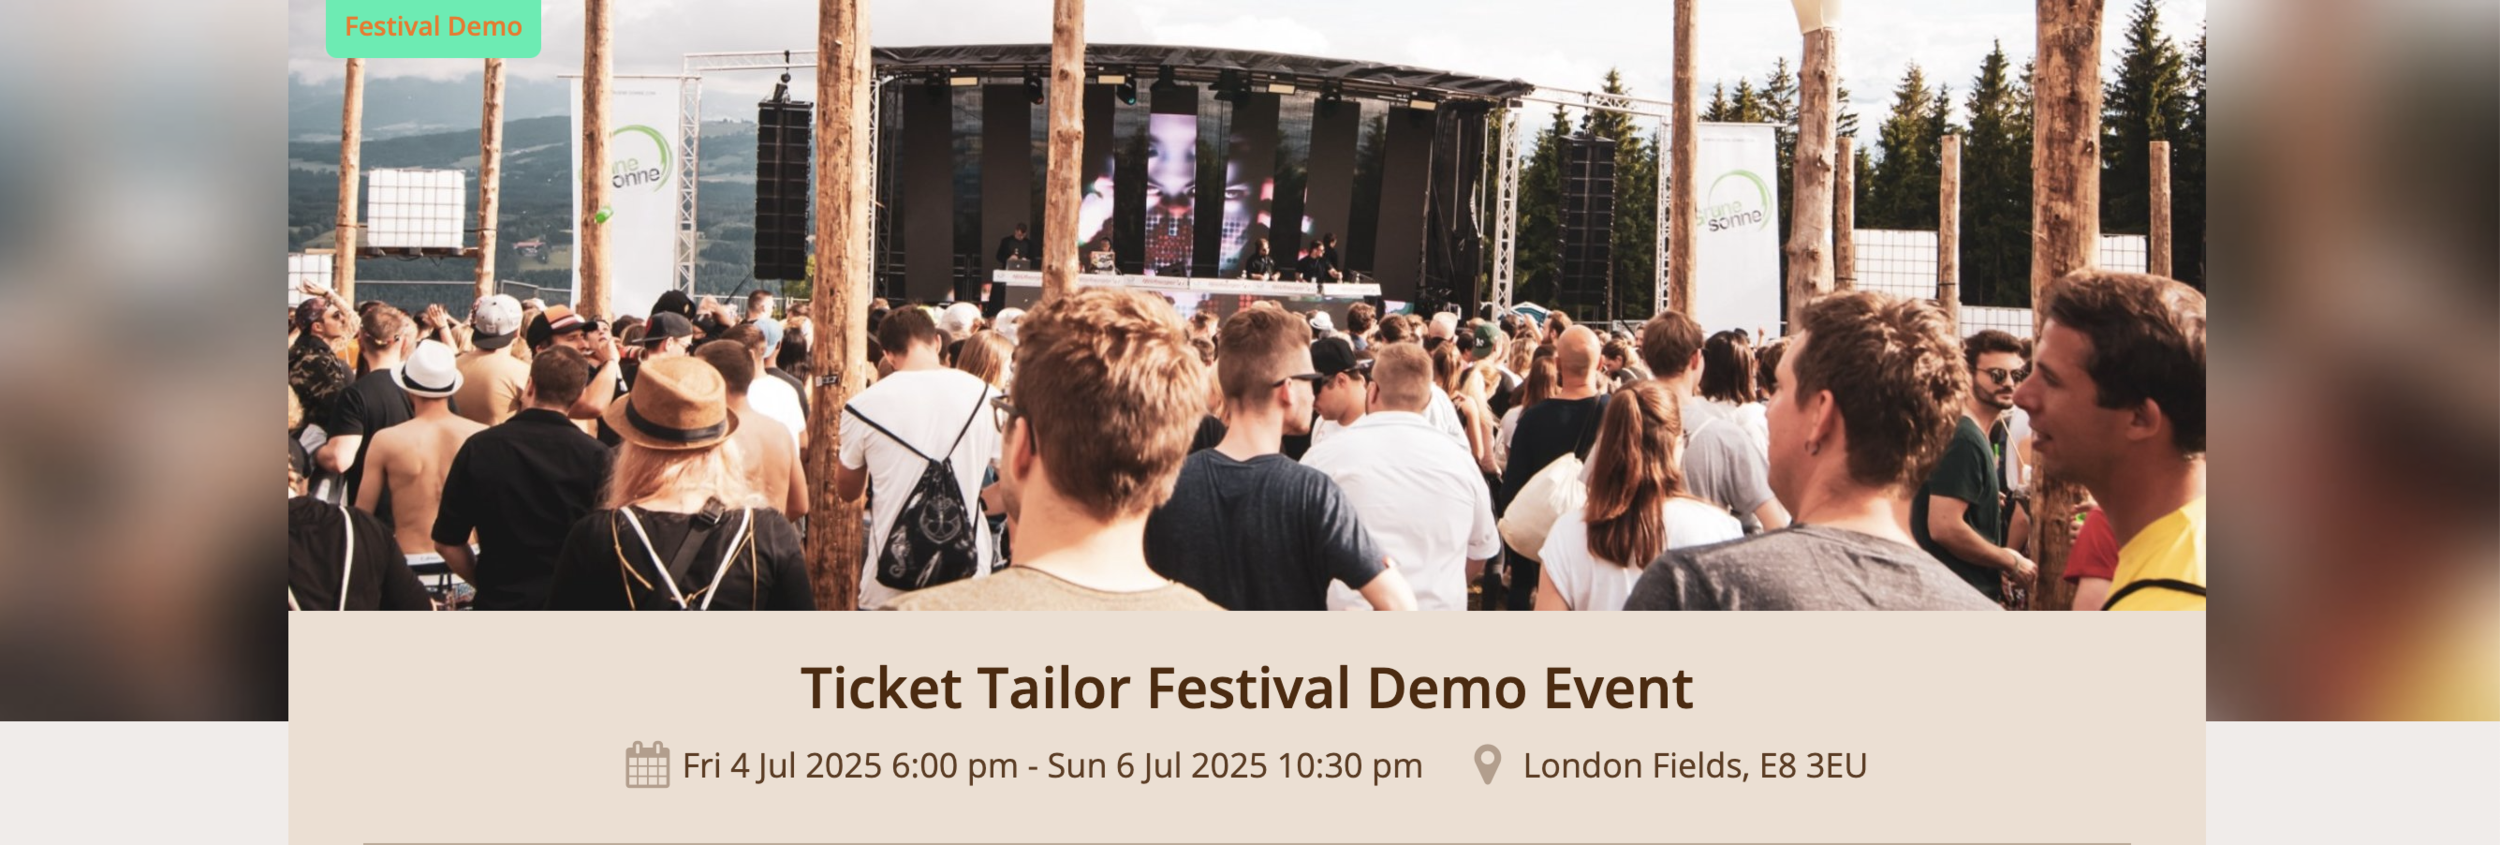 Sell tickets for a music festival